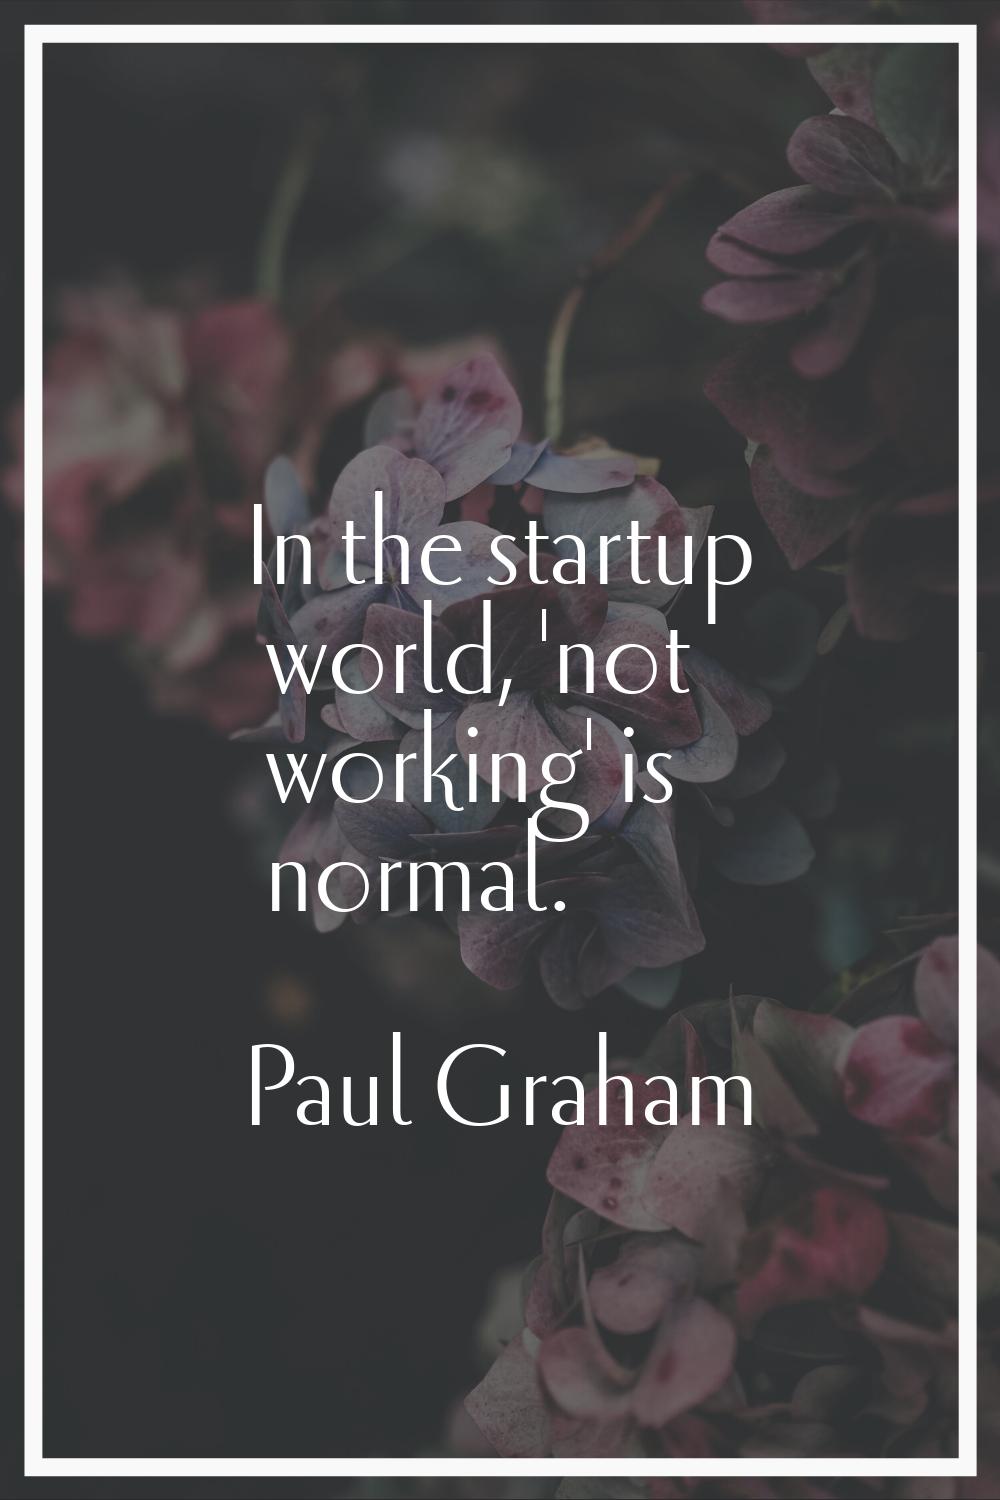 In the startup world, 'not working' is normal.